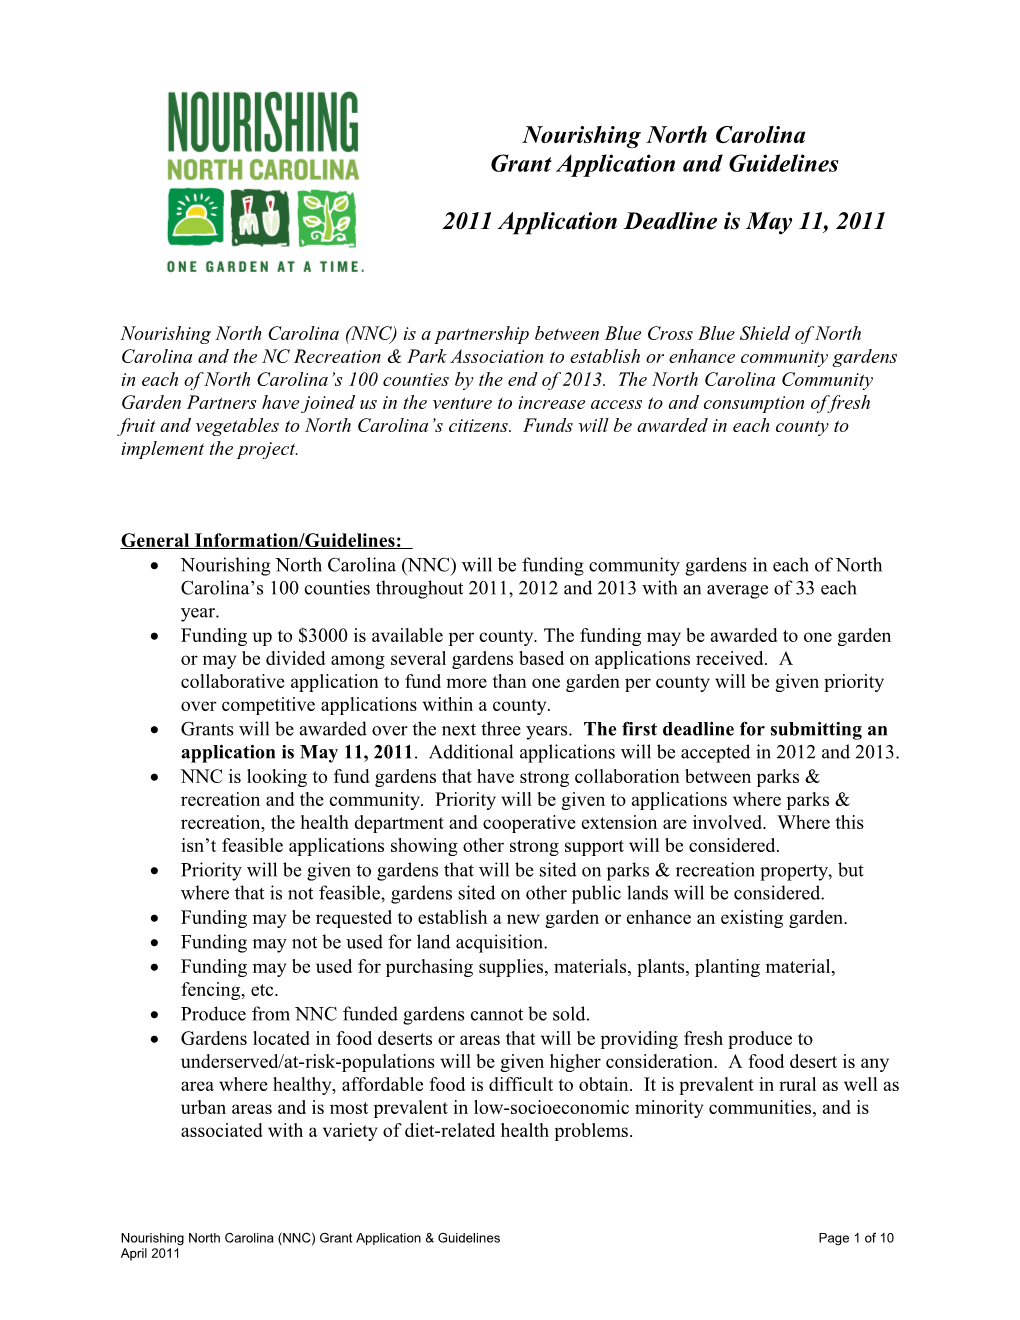 Nourishing NC Grant Application and Guidelines s4